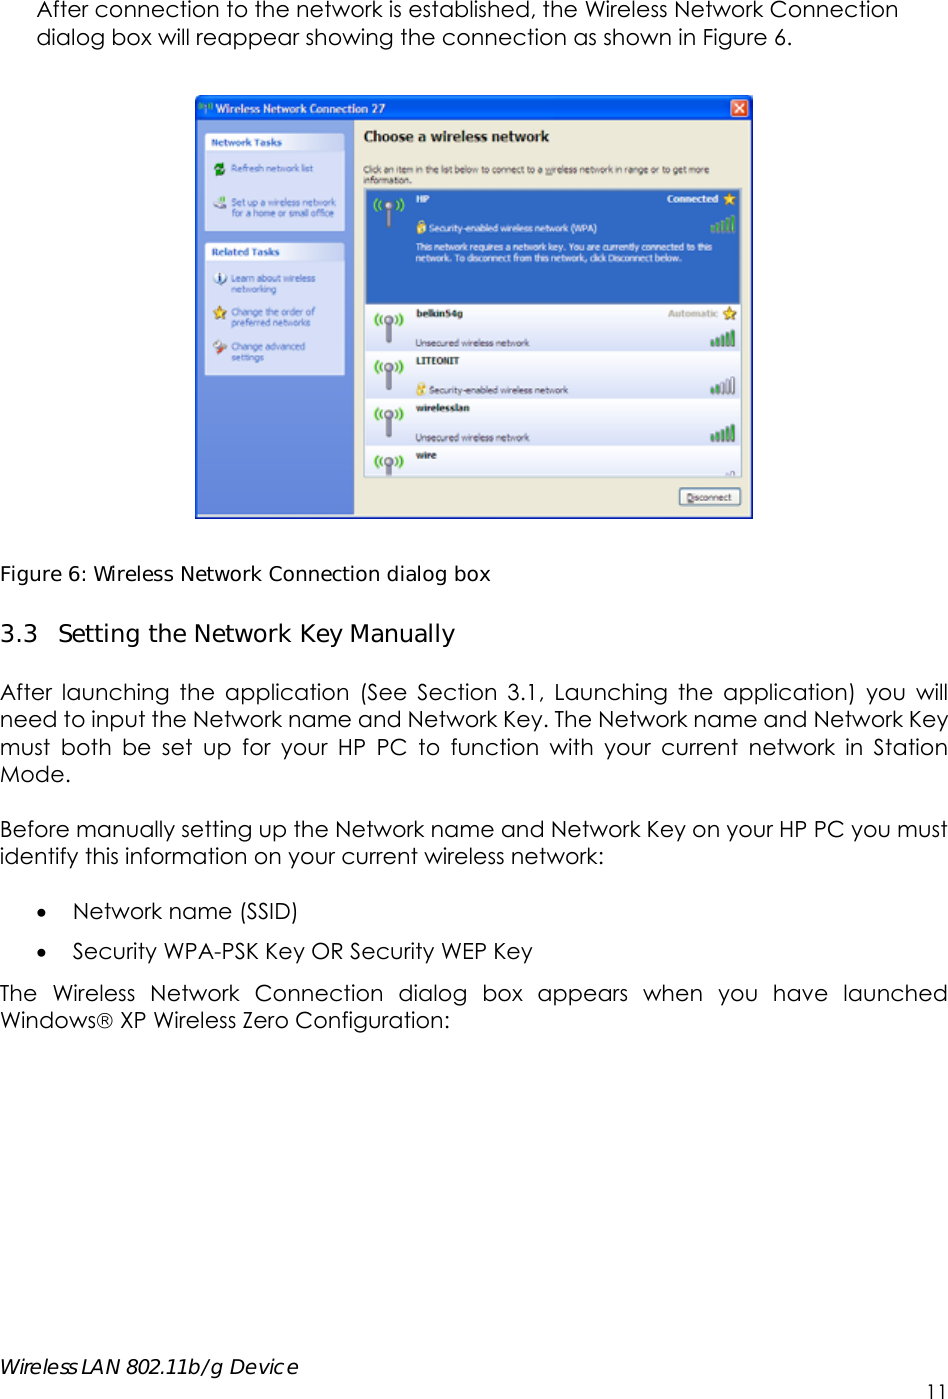     Wireless LAN 802.11b/g Device        11 After connection to the network is established, the Wireless Network Connection dialog box will reappear showing the connection as shown in Figure 6.      Figure 6: Wireless Network Connection dialog box 3.3 Setting the Network Key Manually  After launching the application (See Section 3.1, Launching the application) you will need to input the Network name and Network Key. The Network name and Network Key must both be set up for your HP PC to function with your current network in Station Mode.  Before manually setting up the Network name and Network Key on your HP PC you must identify this information on your current wireless network:   Network name (SSID)  Security WPA-PSK Key OR Security WEP Key  The Wireless Network Connection dialog box appears when you have launched Windows XP Wireless Zero Configuration:  